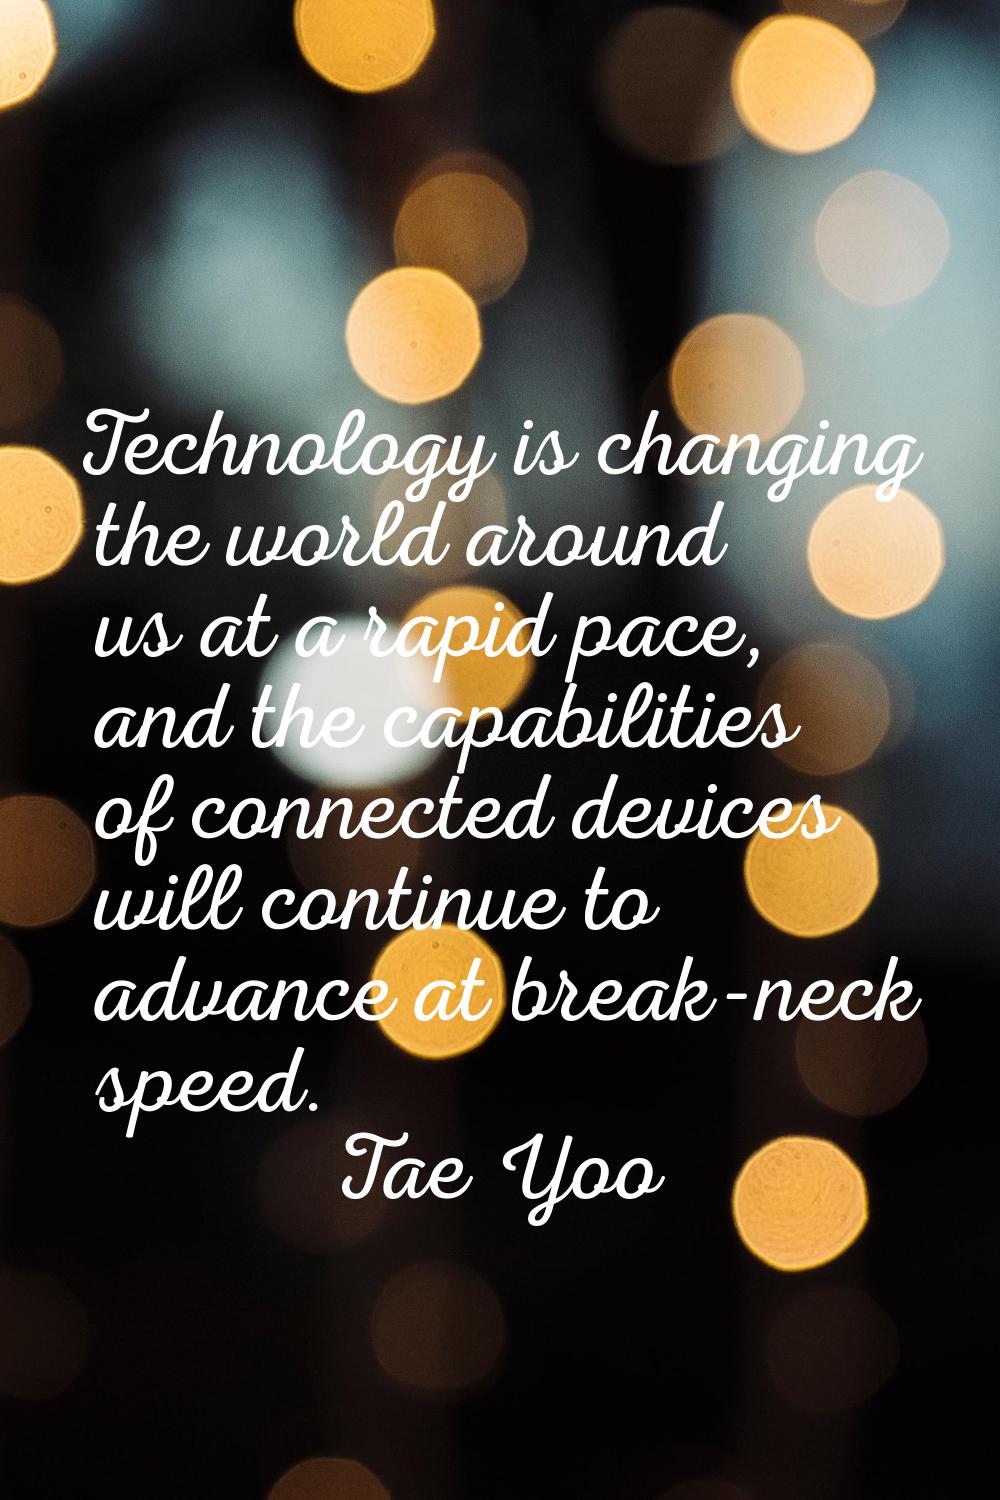 Technology is changing the world around us at a rapid pace, and the capabilities of connected devic